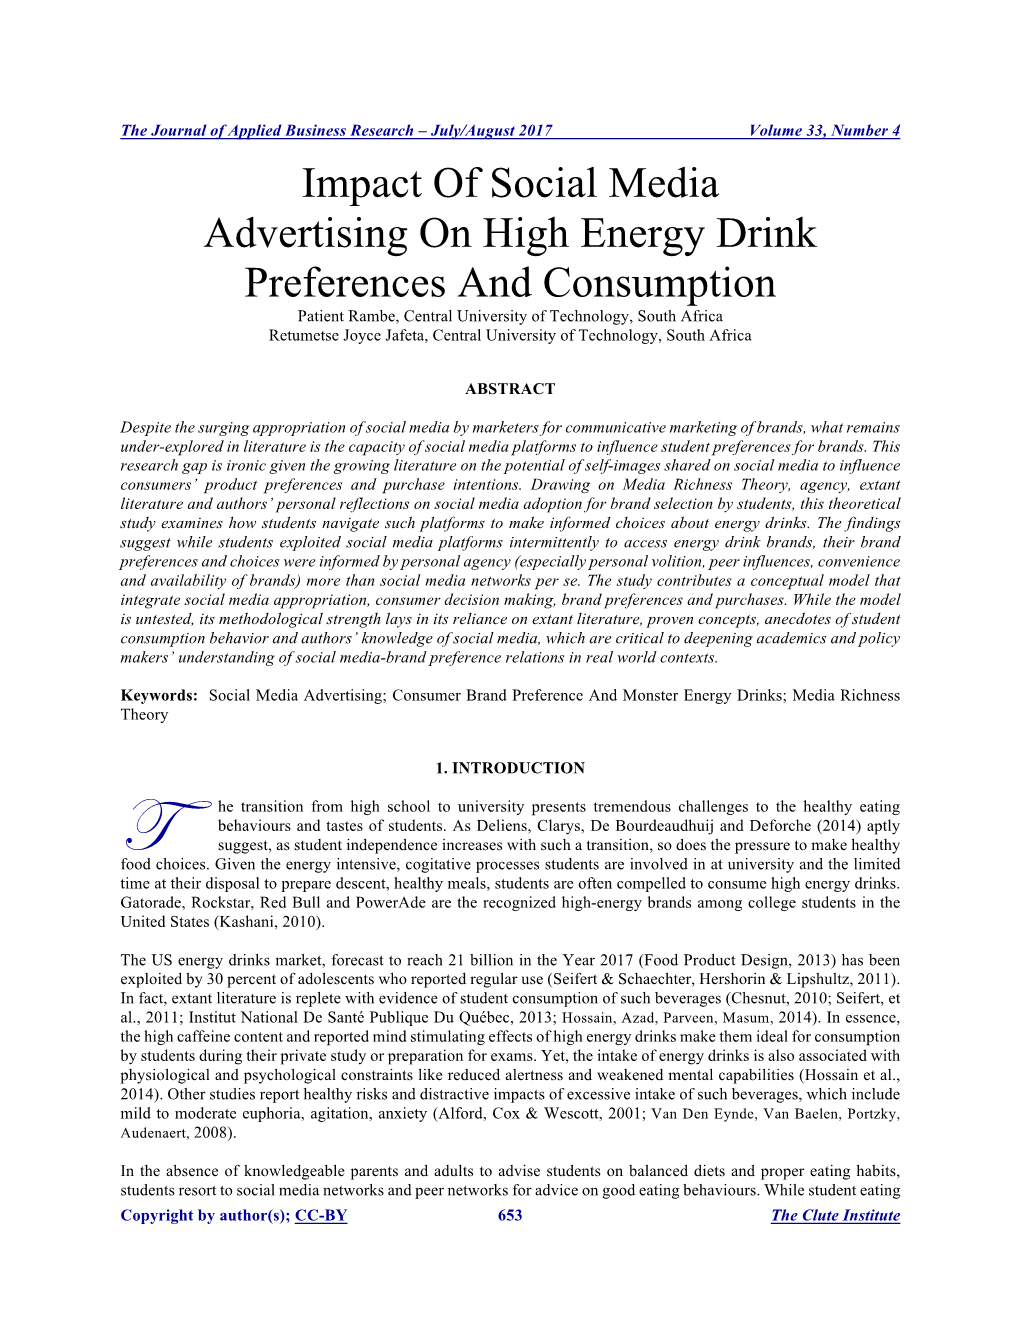 Impact of Social Media Advertising on High Energy Drink Preferences